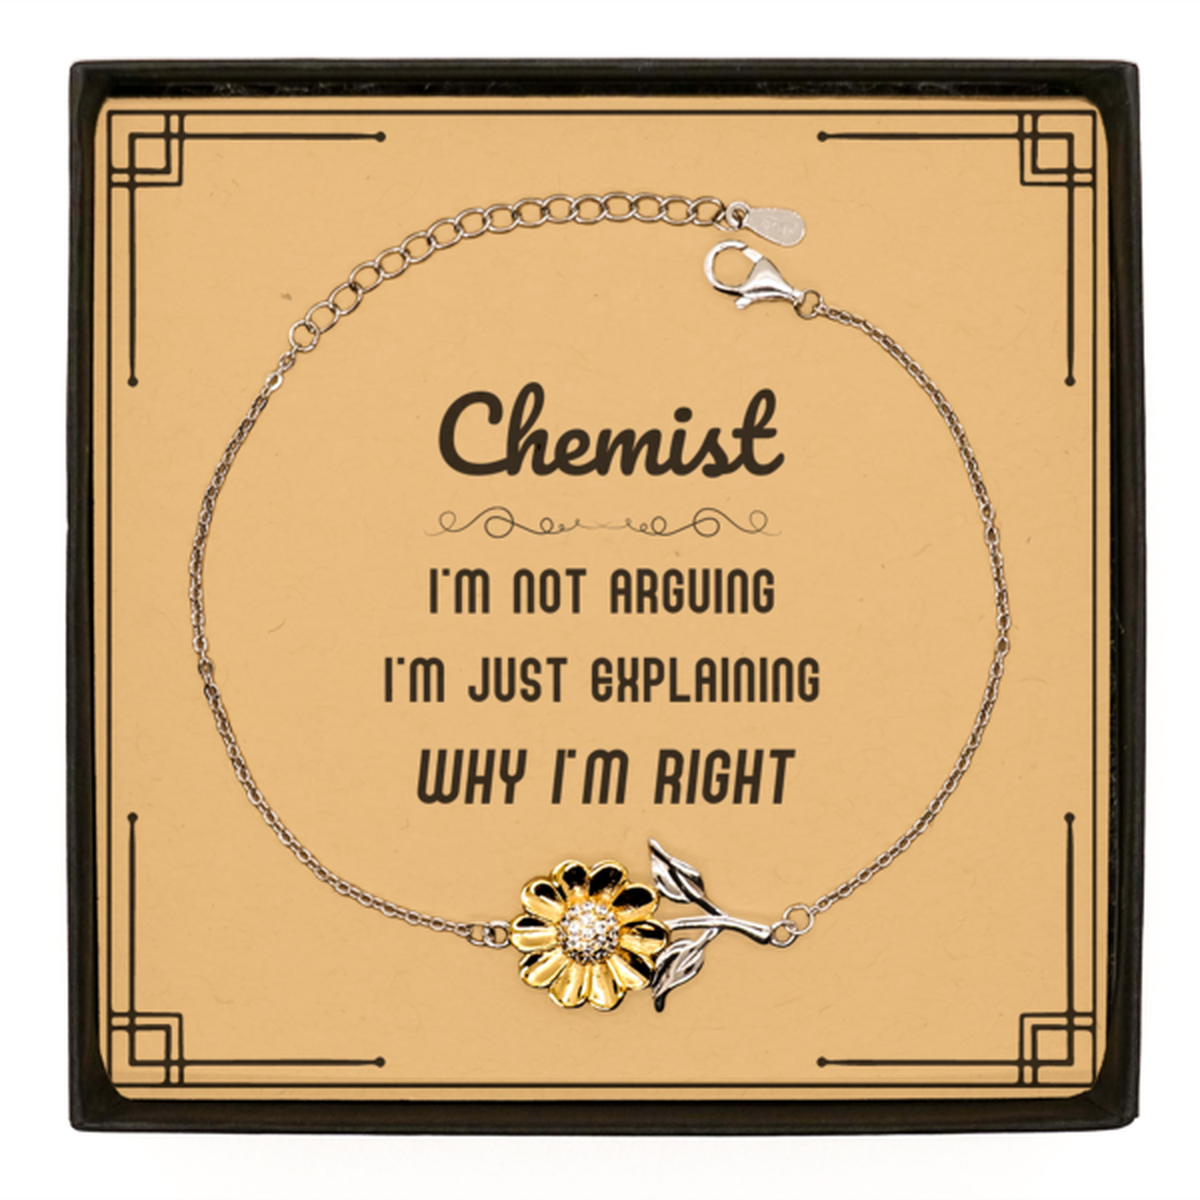 Chemist I'm not Arguing. I'm Just Explaining Why I'm RIGHT Sunflower Bracelet, Funny Saying Quote Chemist Gifts For Chemist Message Card Graduation Birthday Christmas Gifts for Men Women Coworker